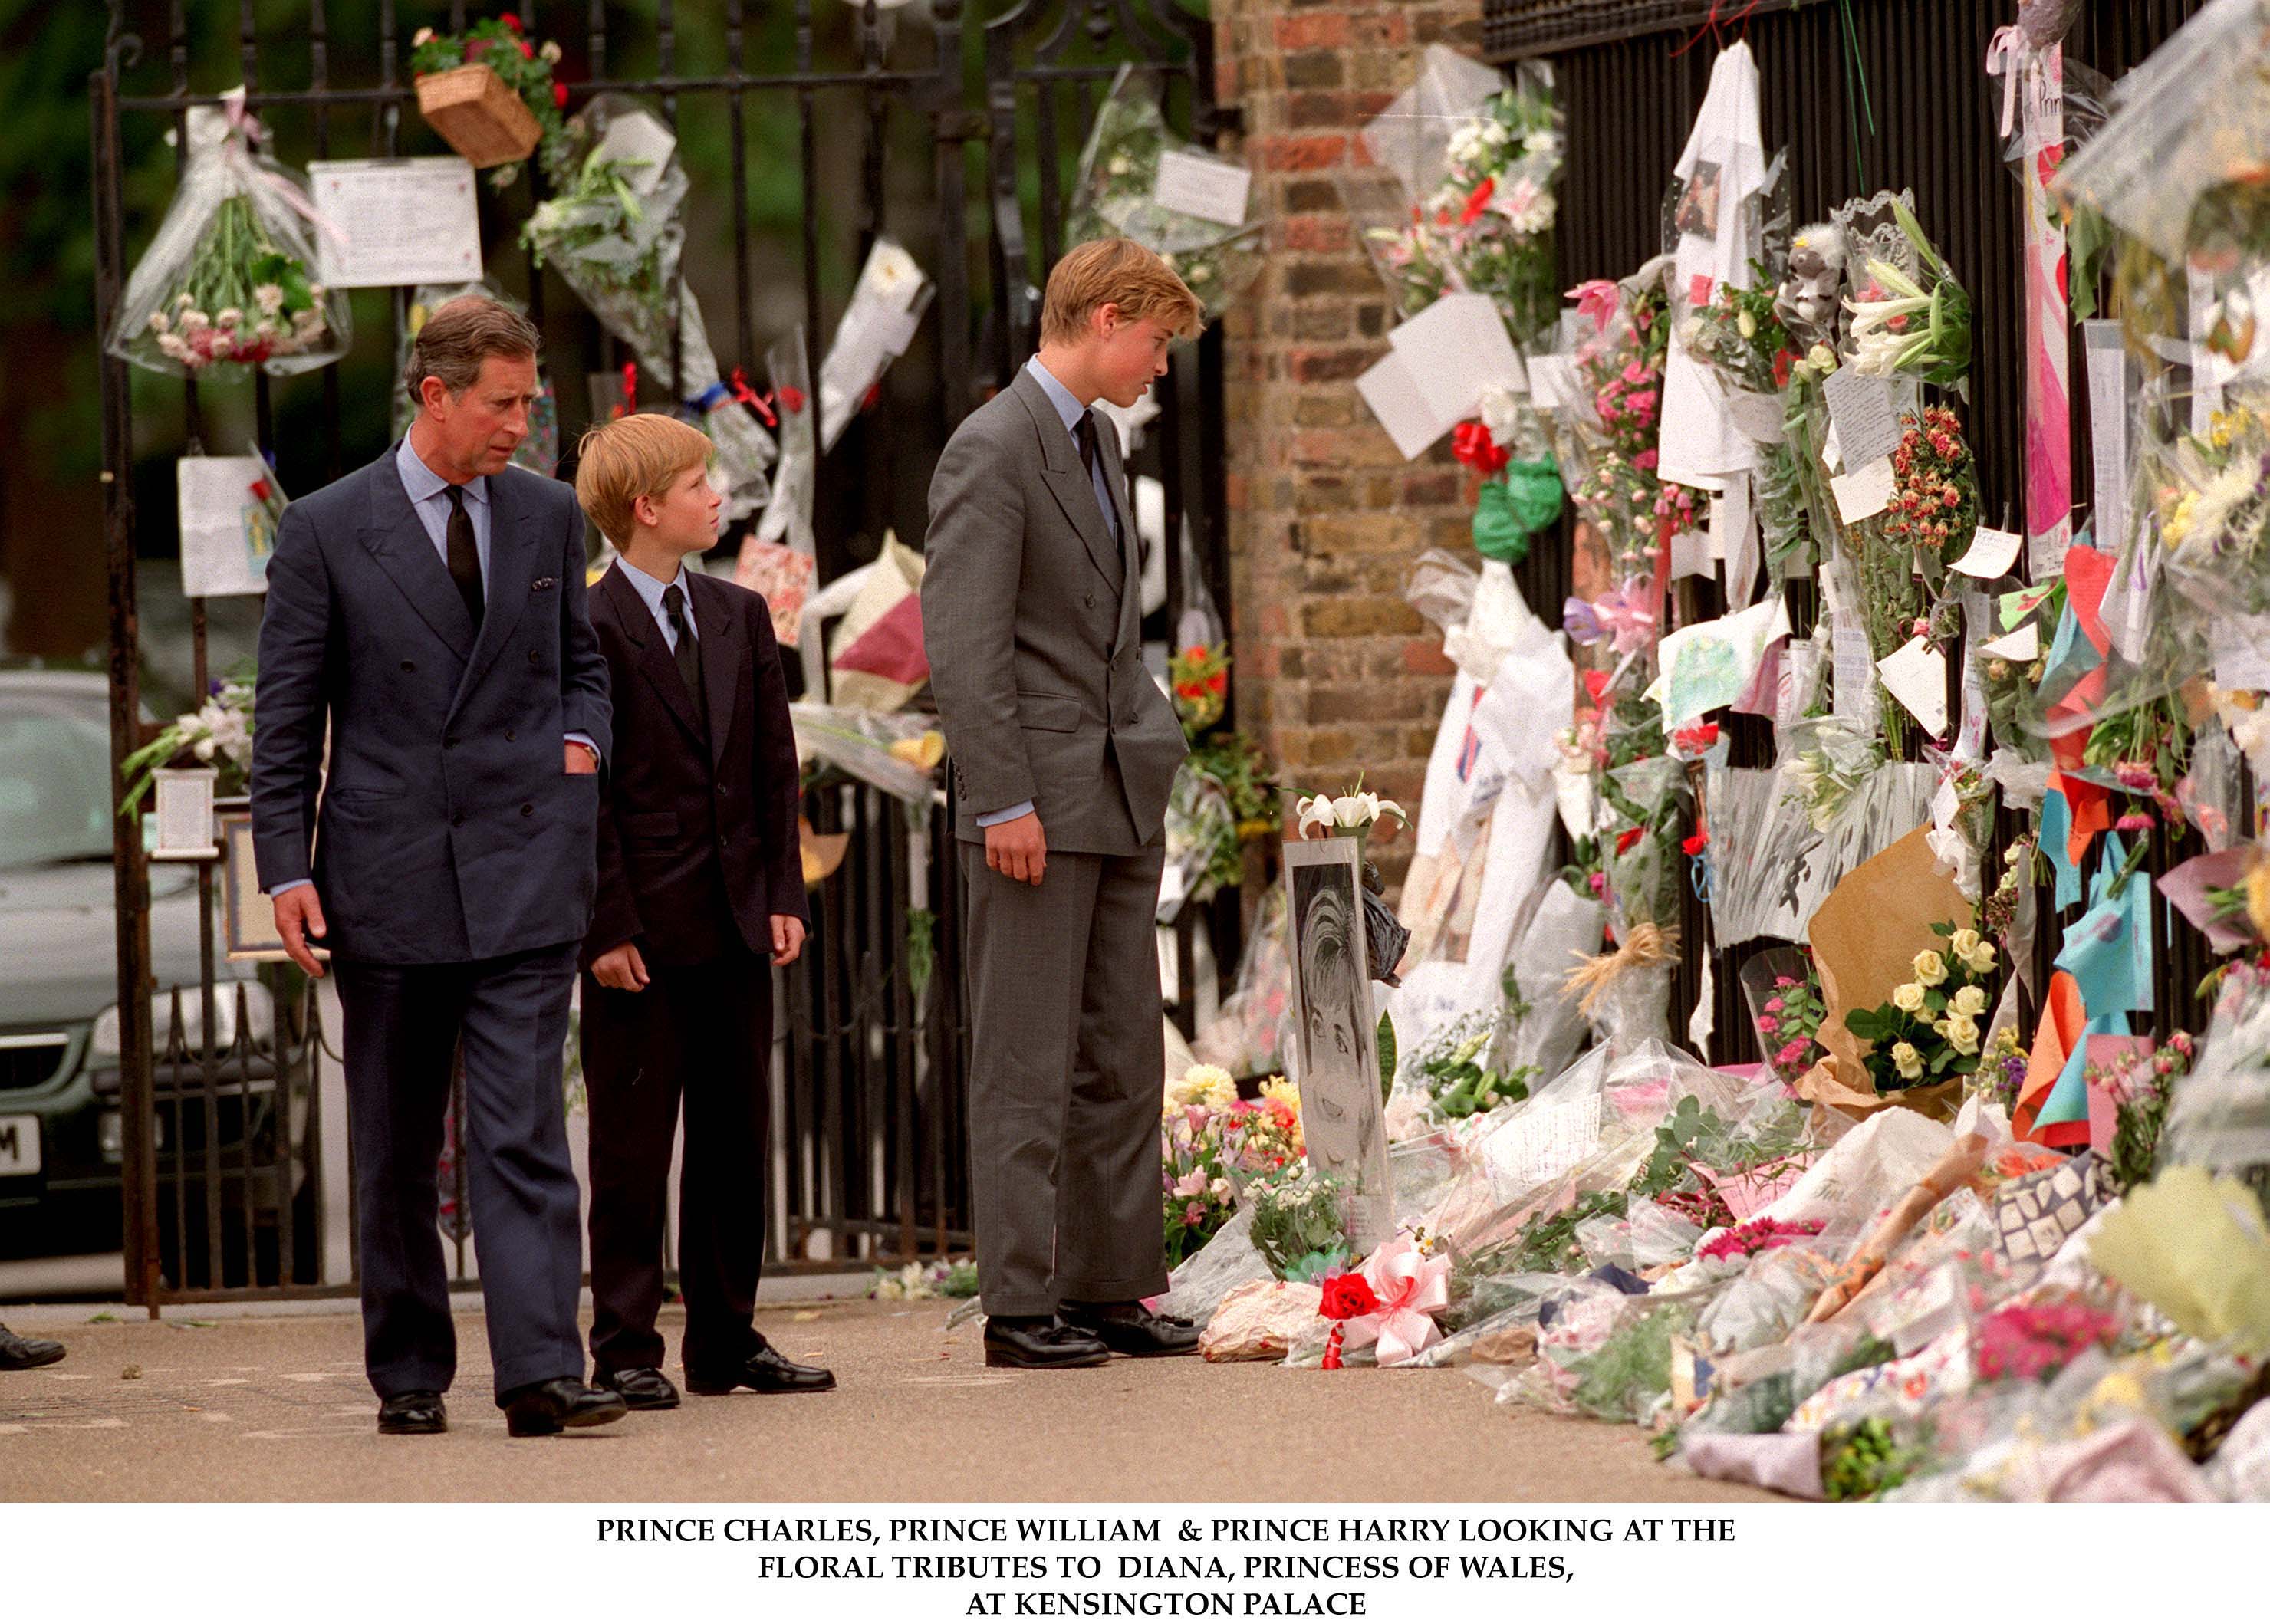 Prince Charles, Prince Harry, and Prince William viewing flower tributes to Princess Diana at Kensington Palace